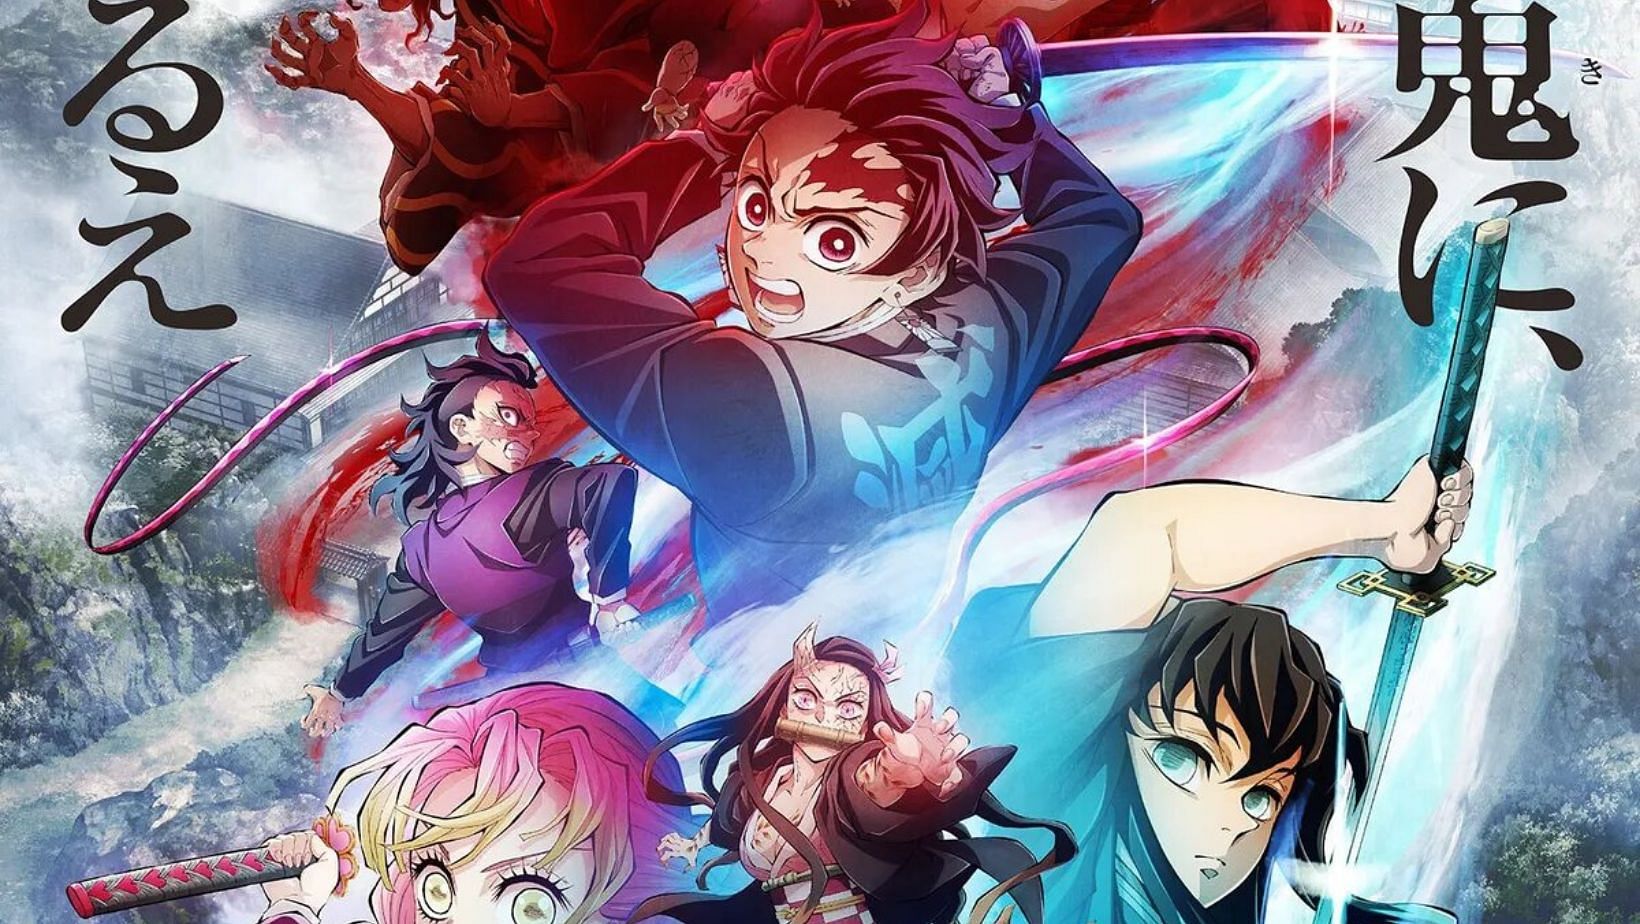 Demon Slayer' season 3 ends: a journey of epic backstories, breakthroughs, The Daily Star